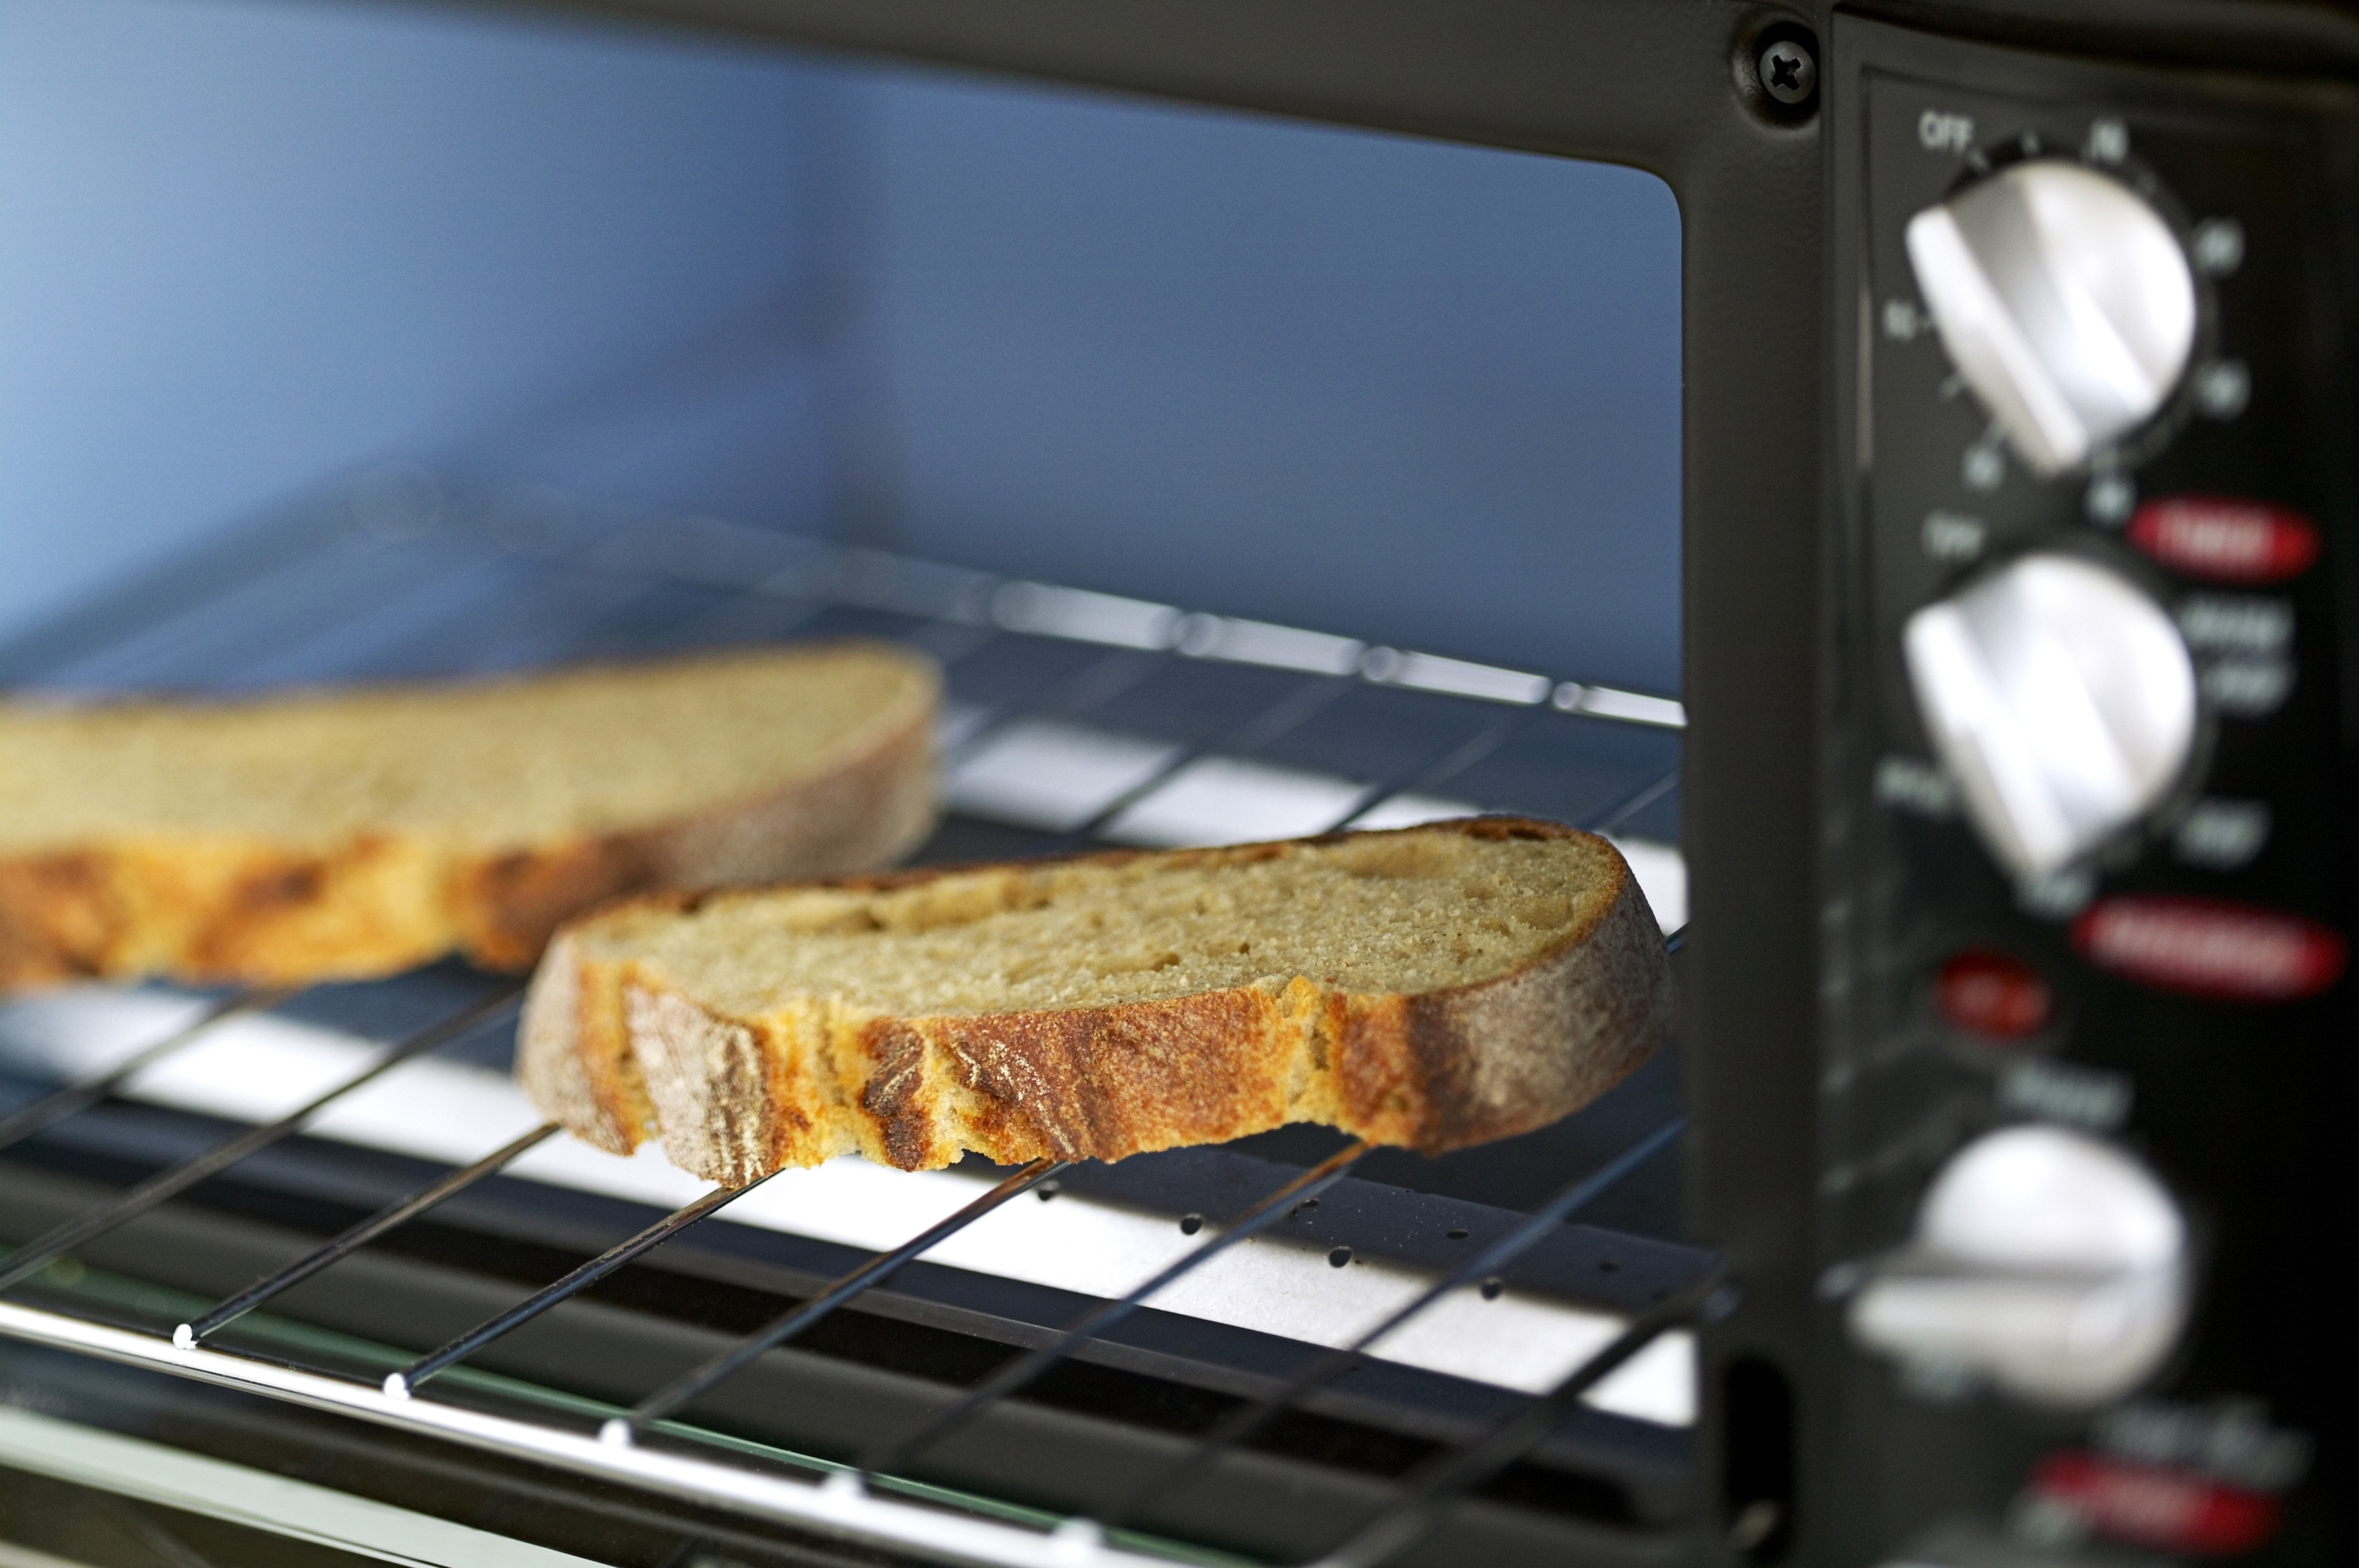 How to Repair a Toaster Oven - How to Repair Small Appliances